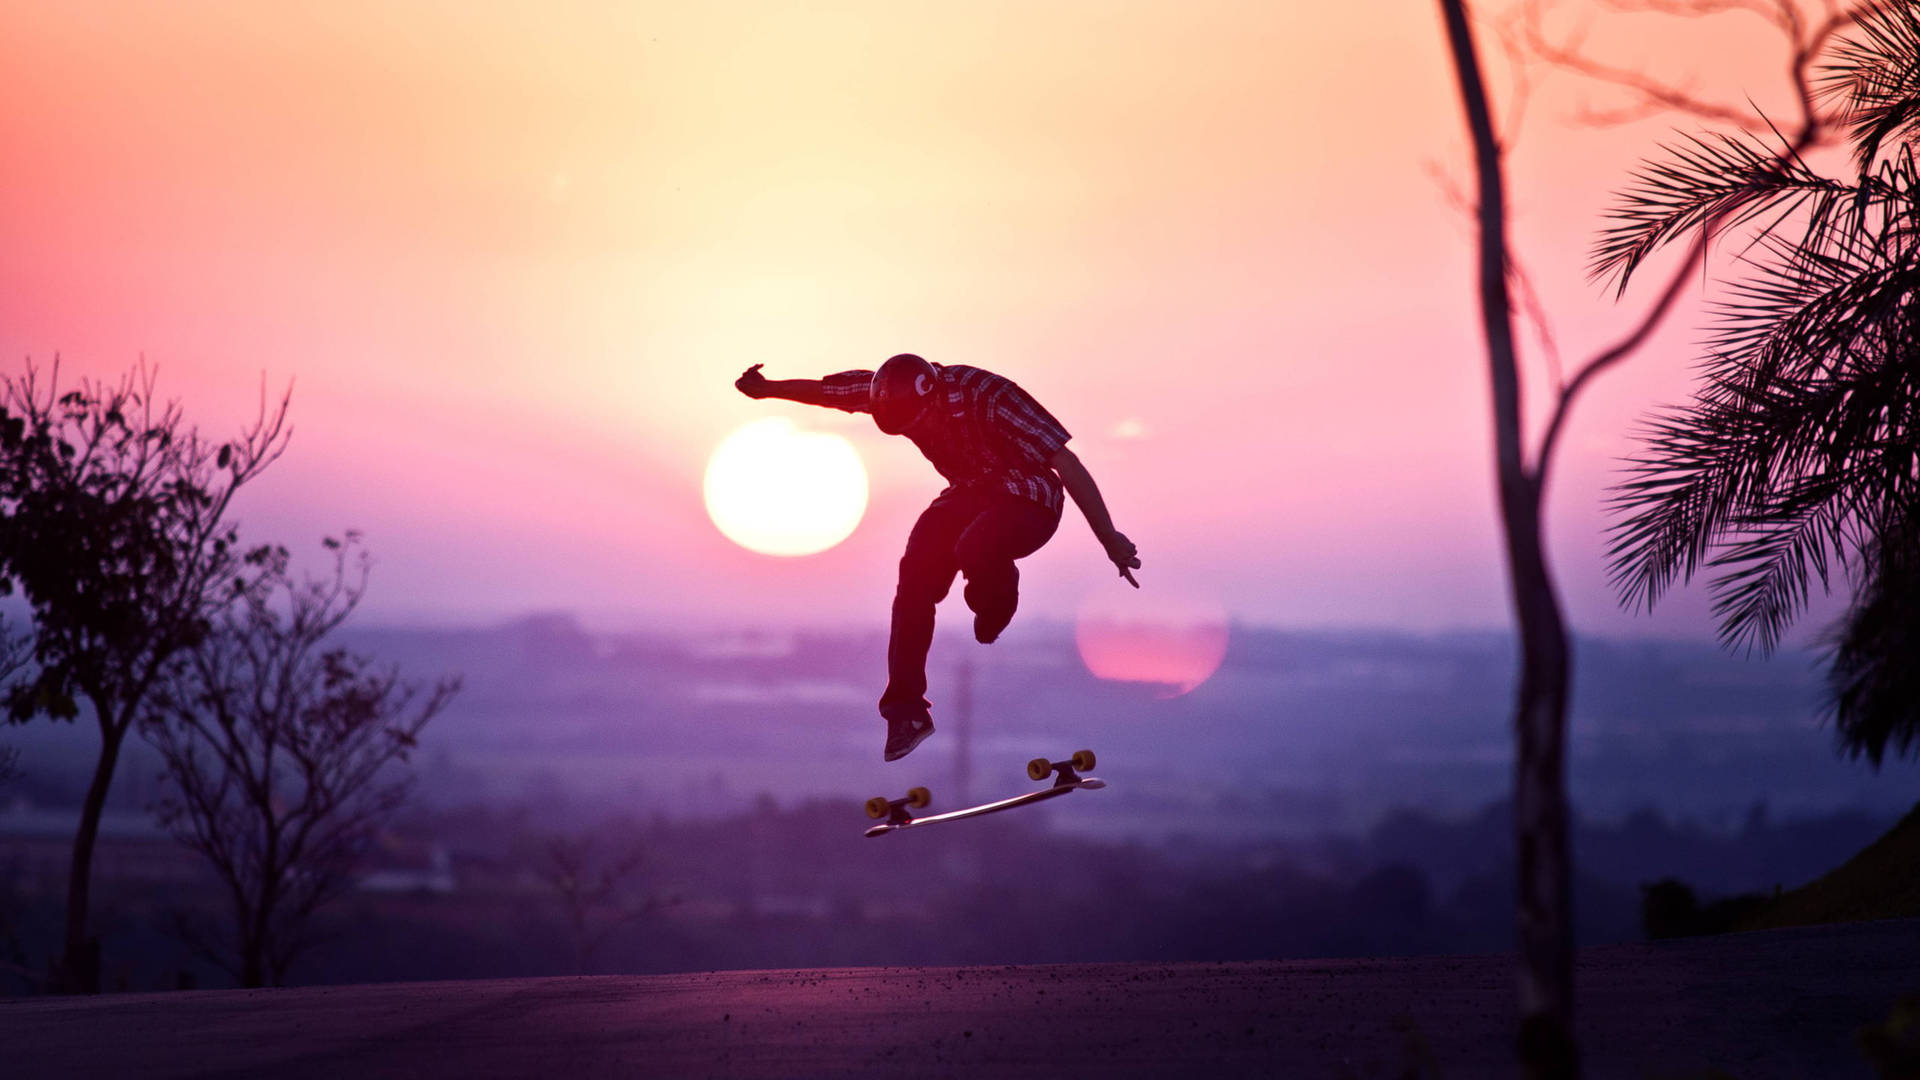 Extreme Sports Skateboarding Sunset Picture